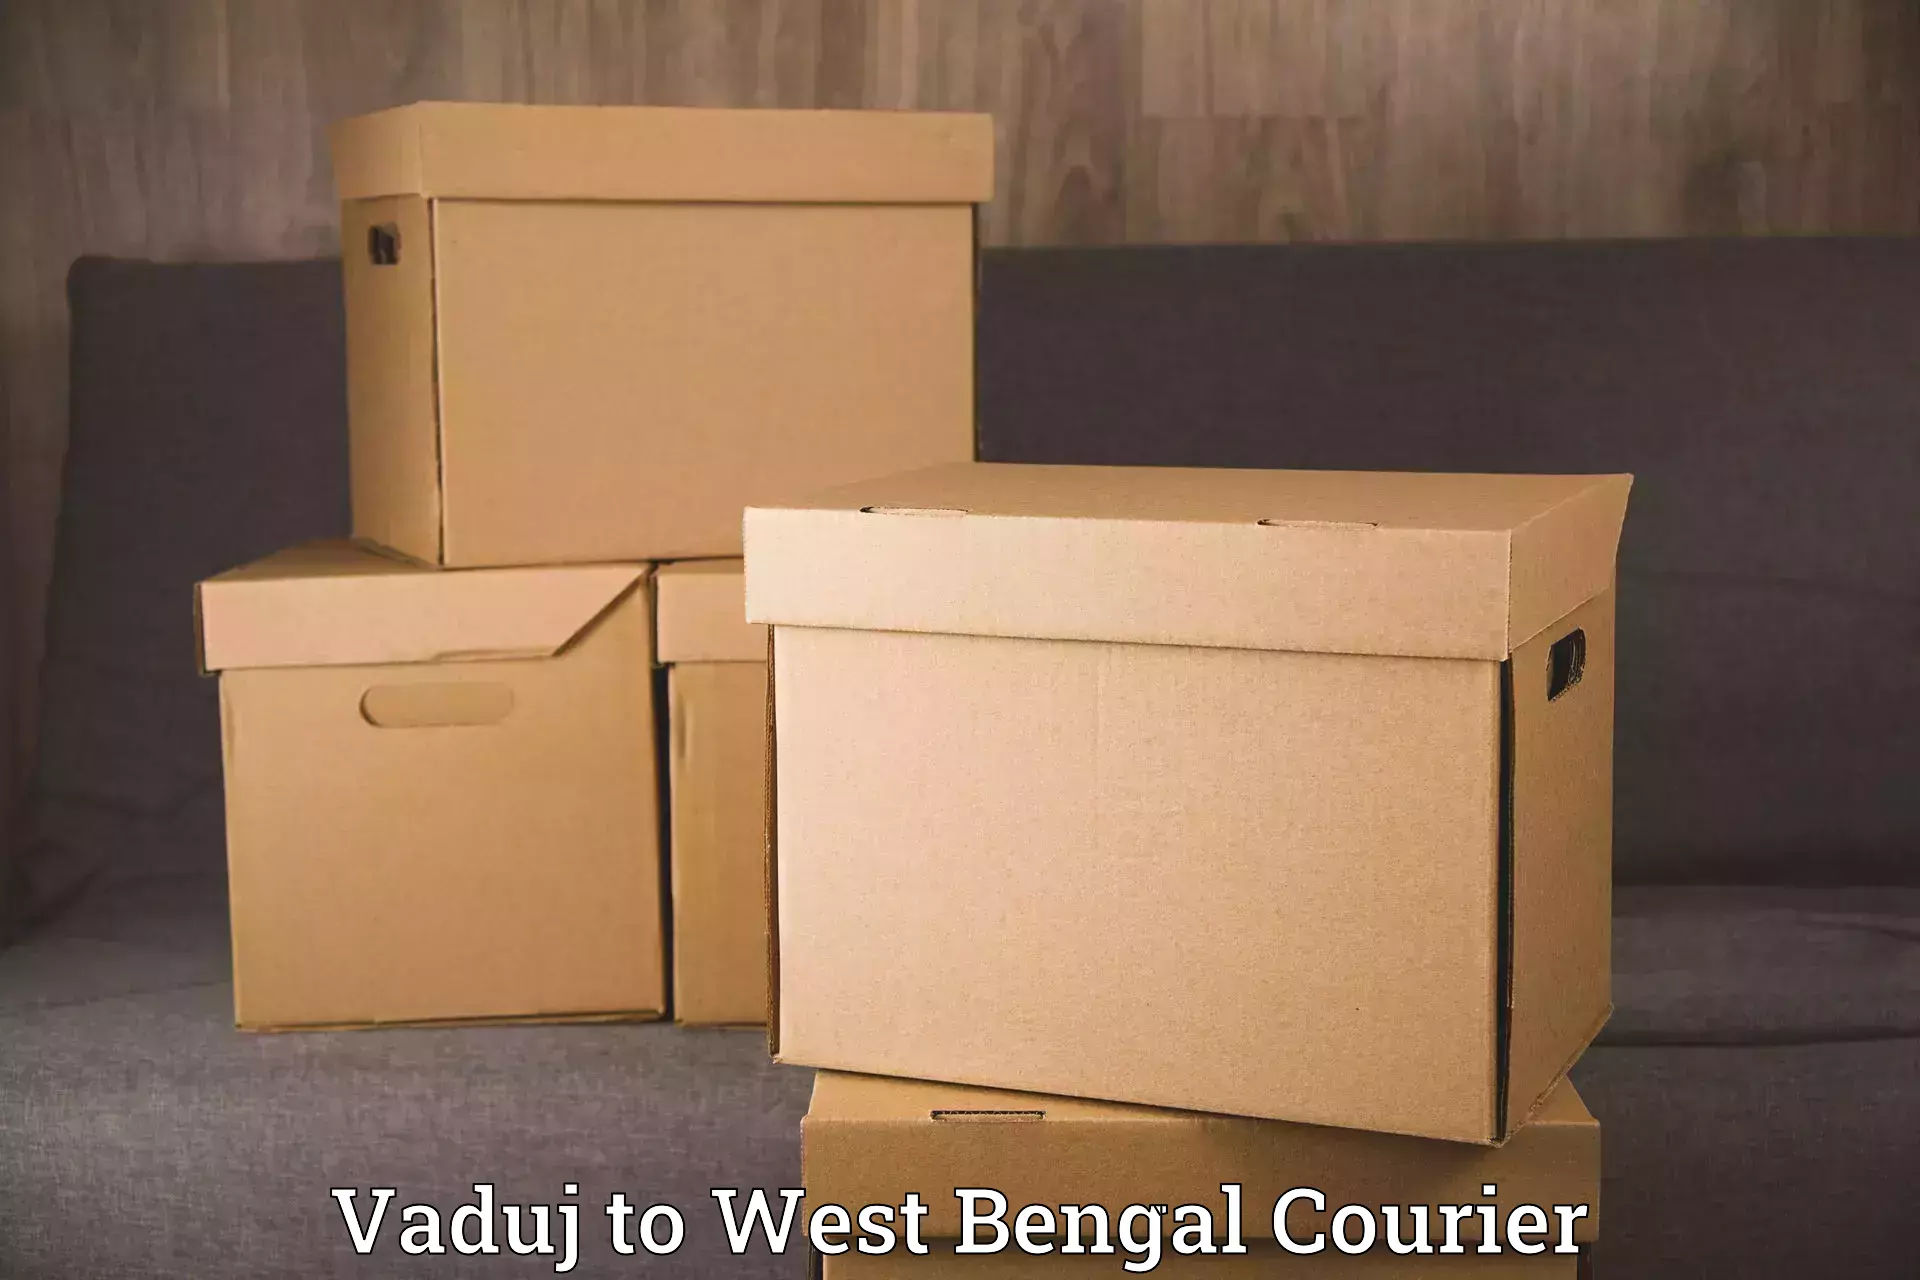 Efficient moving company Vaduj to West Bengal